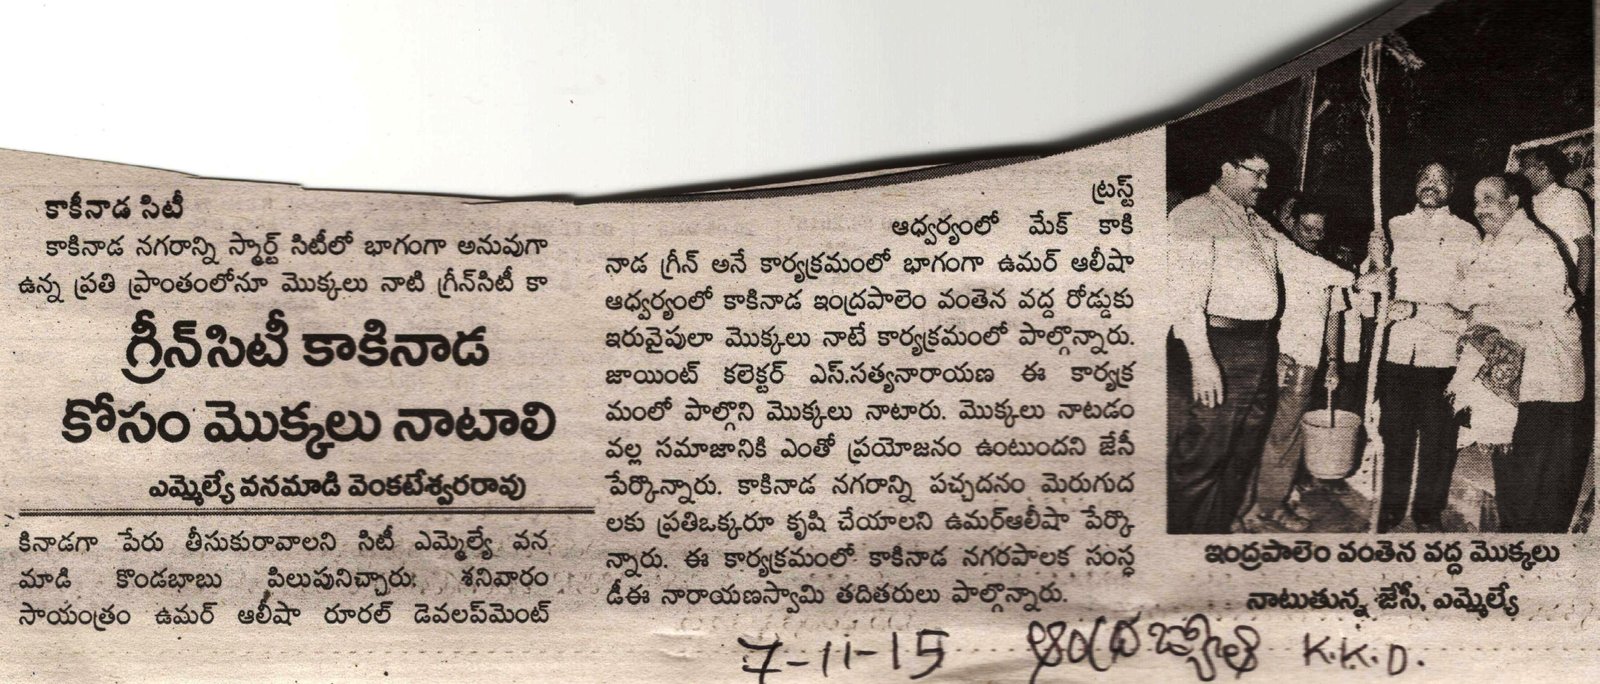 News Clipping about Make Kakinada Green in Andhra Jyothi